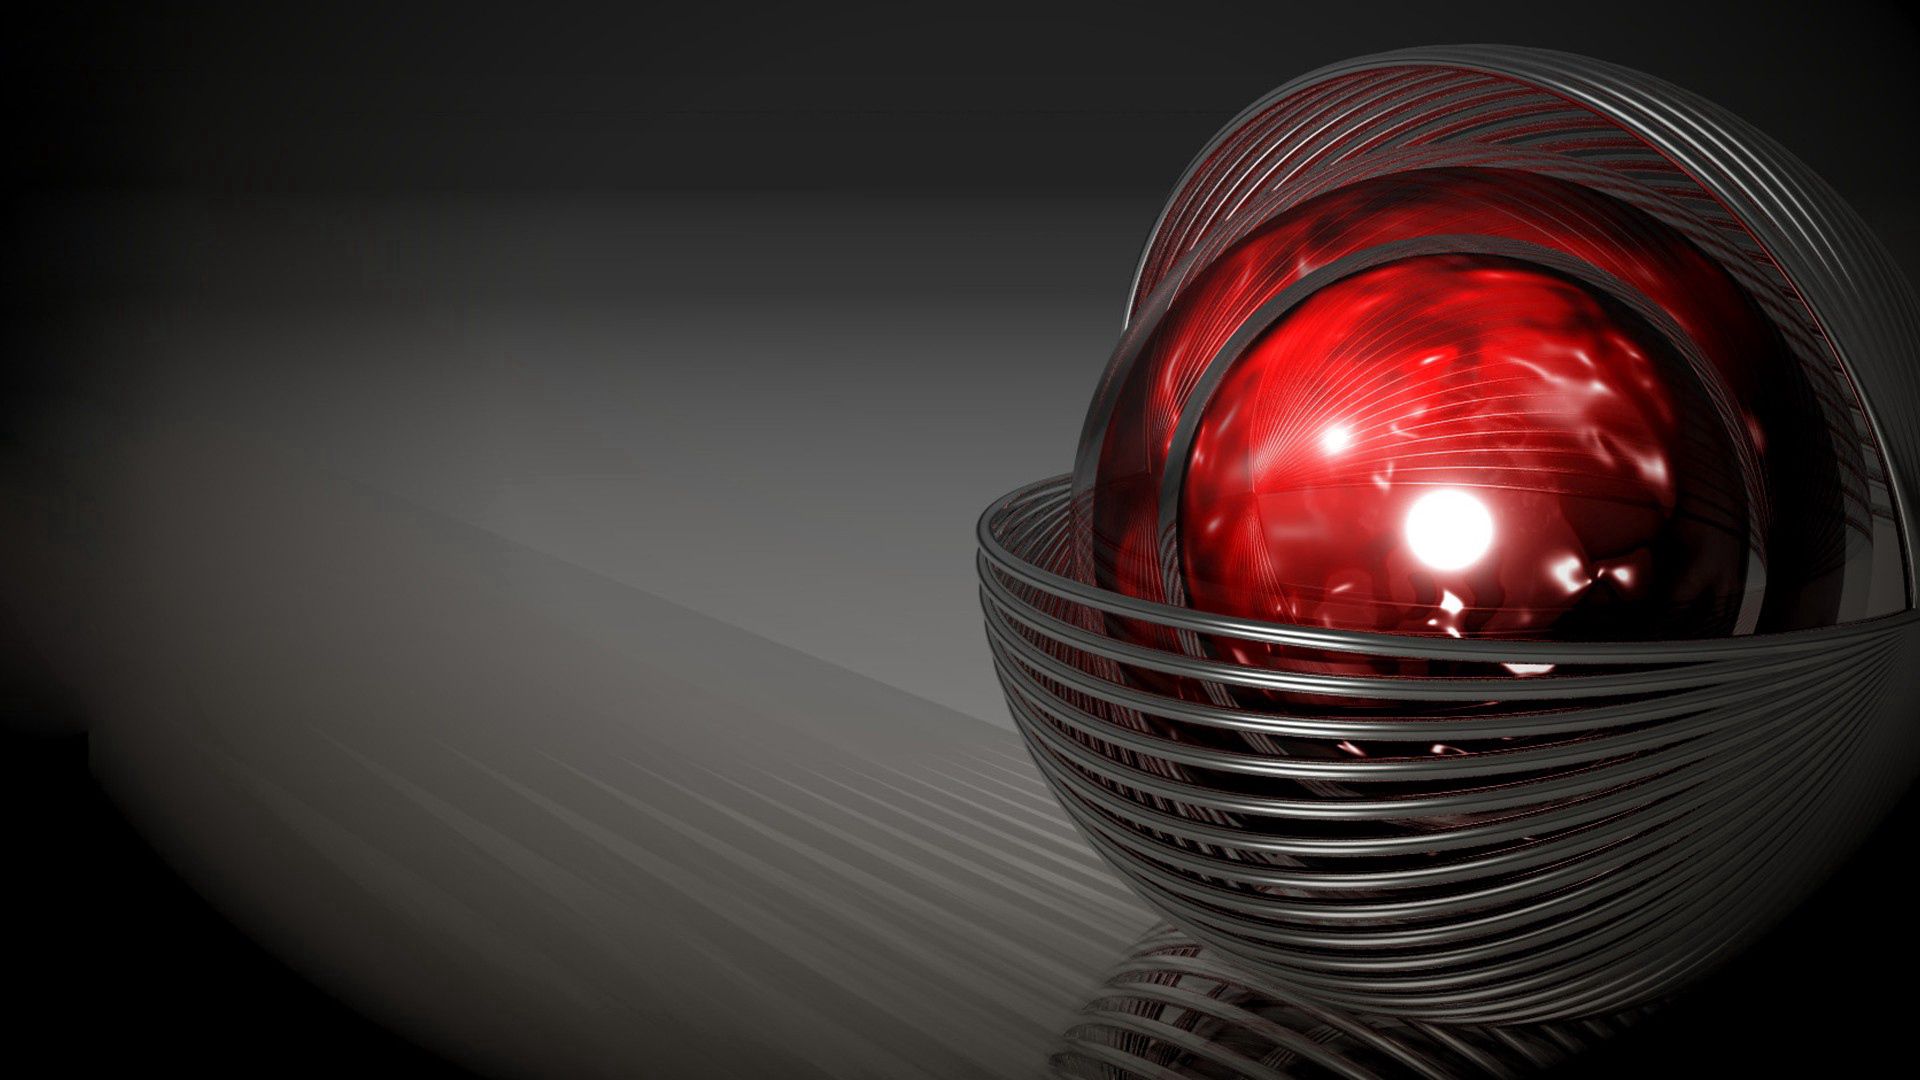 107031 download wallpaper 3d, red, form, ball, graphics screensavers and pictures for free